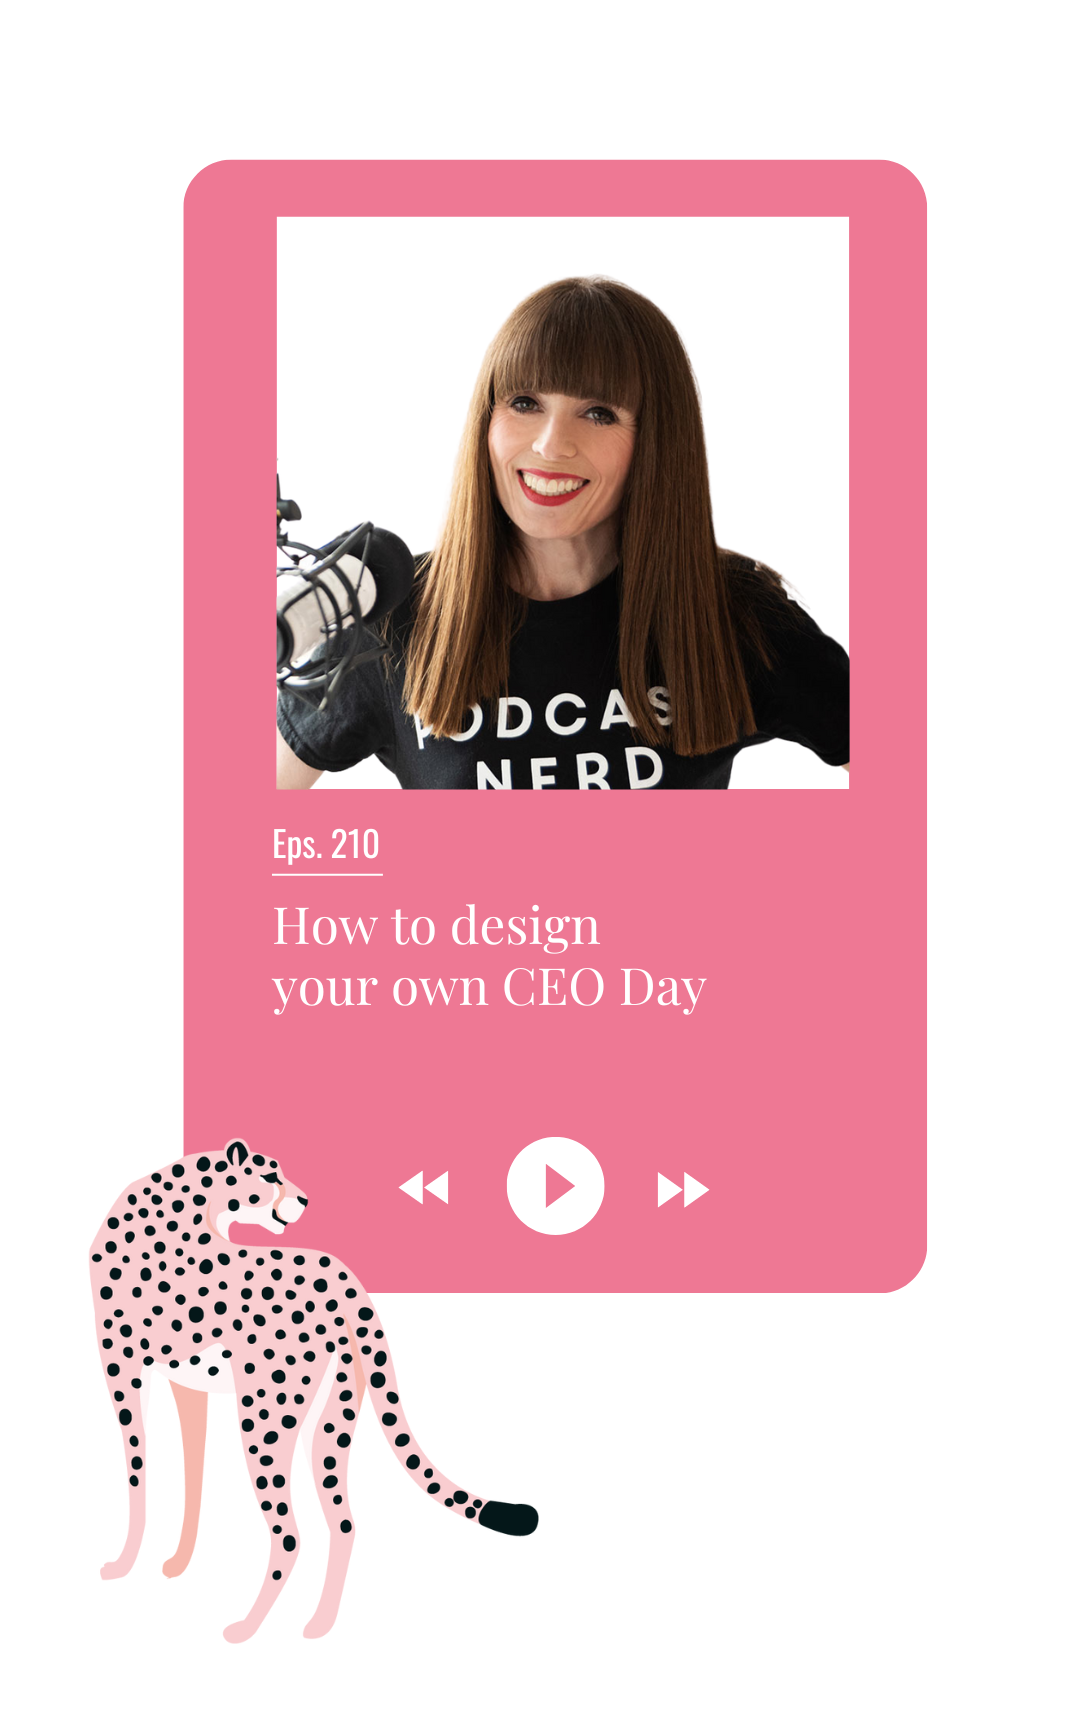 How to design your own CEO Day